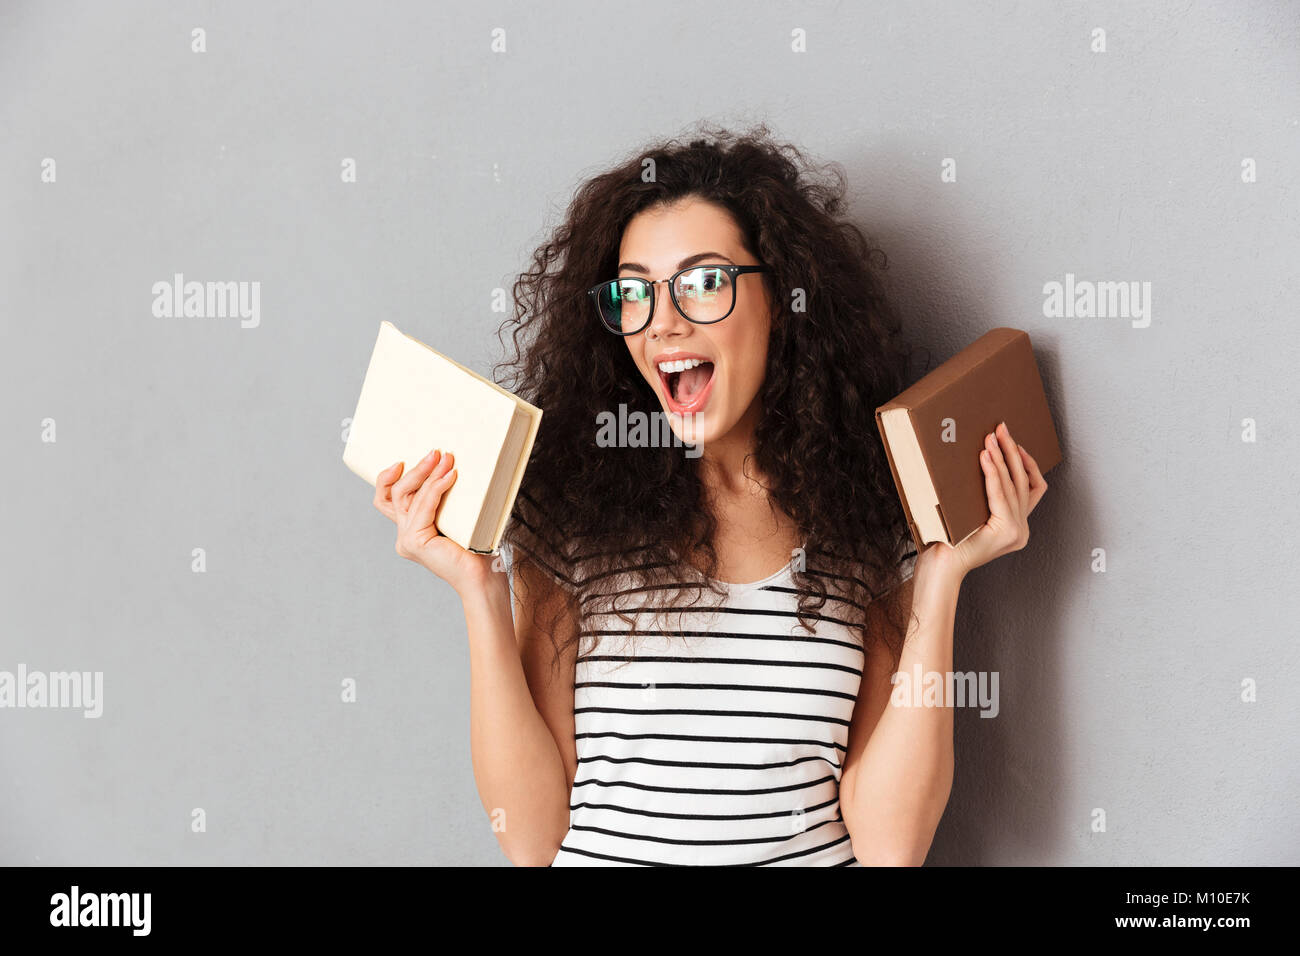 Woman with brown curly hair being student in university posing with interesting books in hands, taking pleasure in education isolated over grey wall Stock Photo